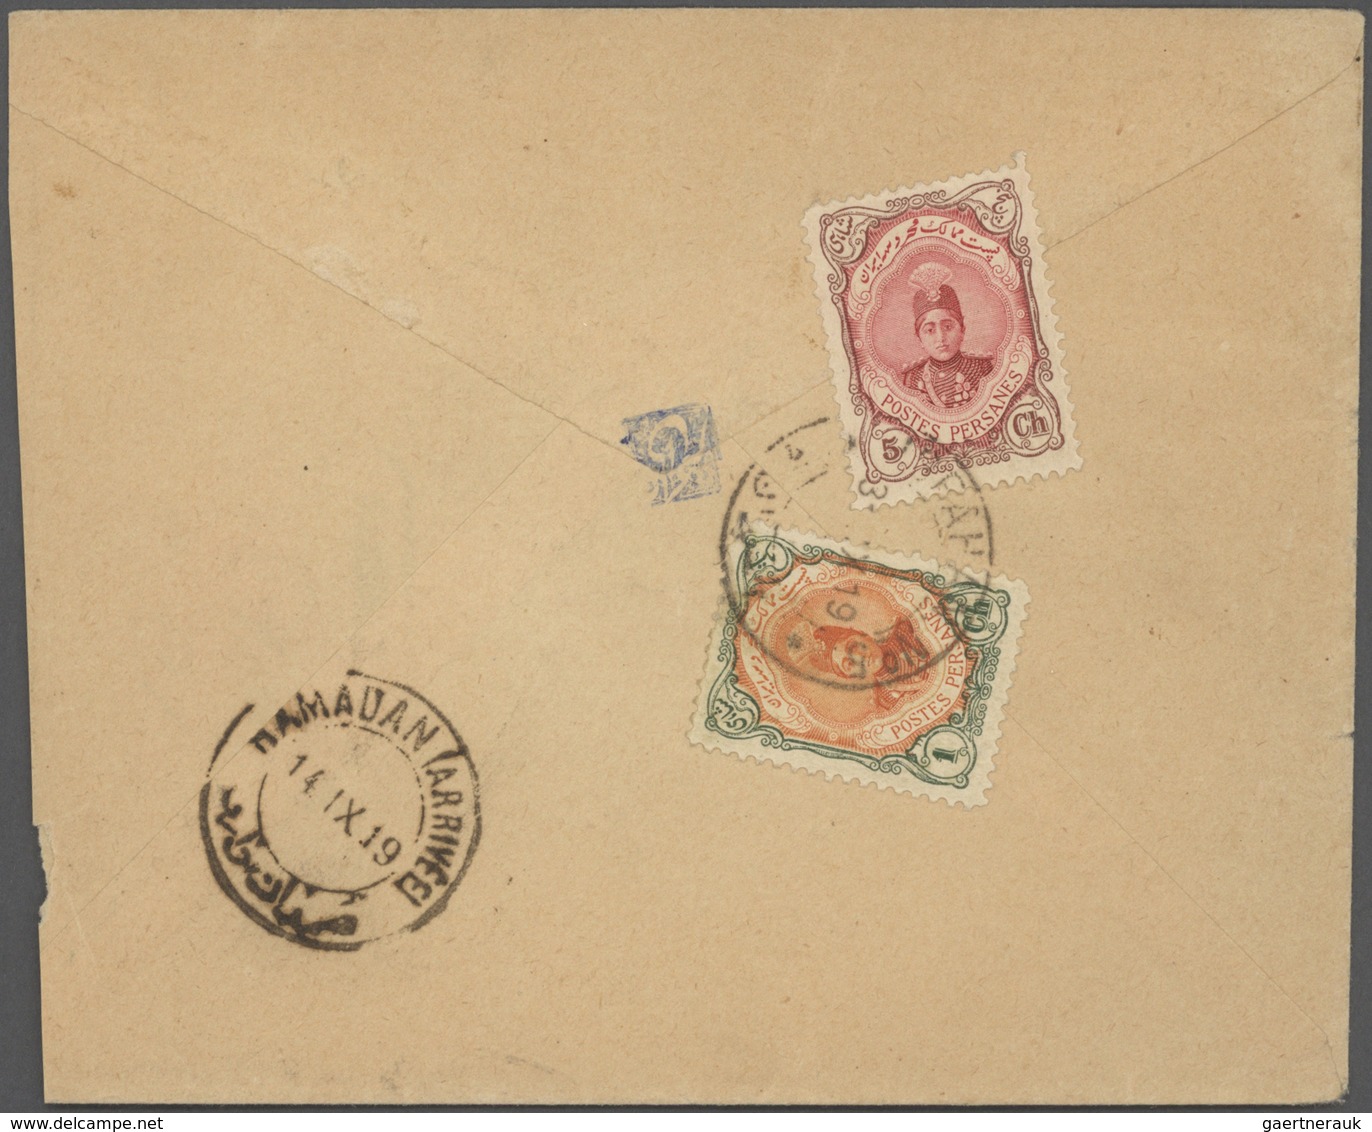 Iran: 1914-18 ca., 8 covers franked with overprinted issues, censors WW I, some different, fine grou